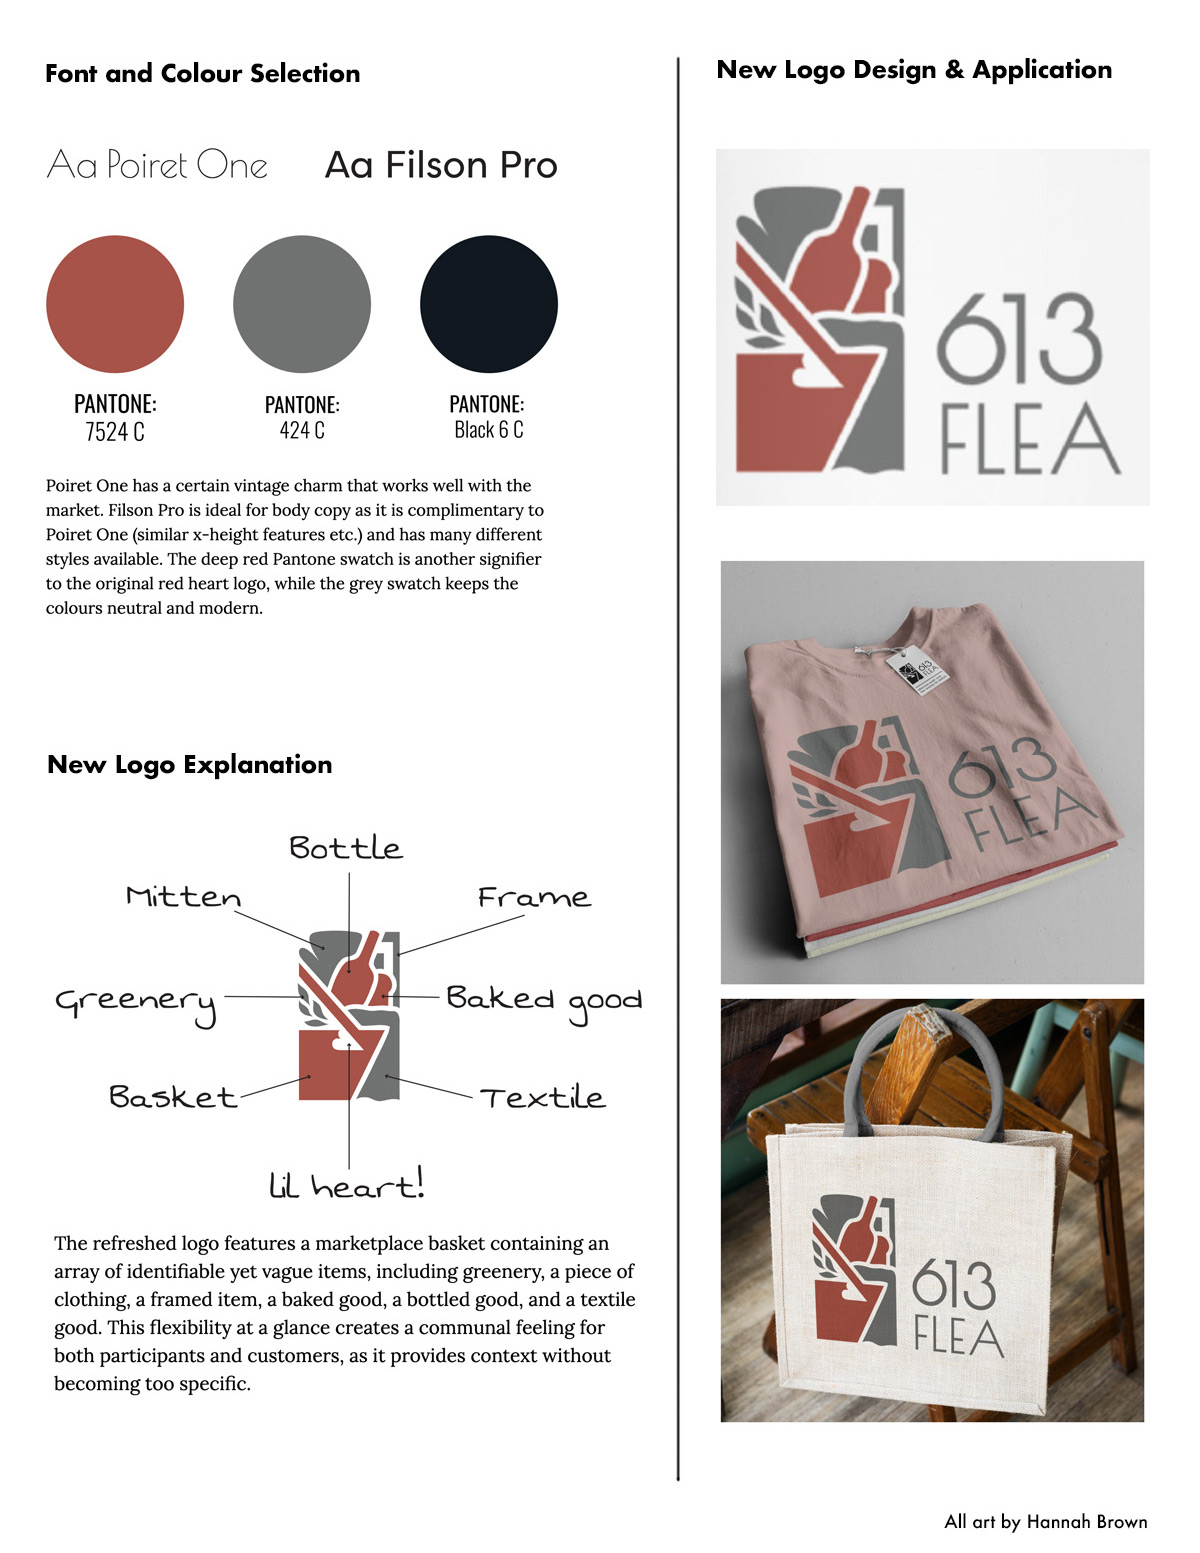 Font and colour selection, logo explanation and new logo design for 613flea